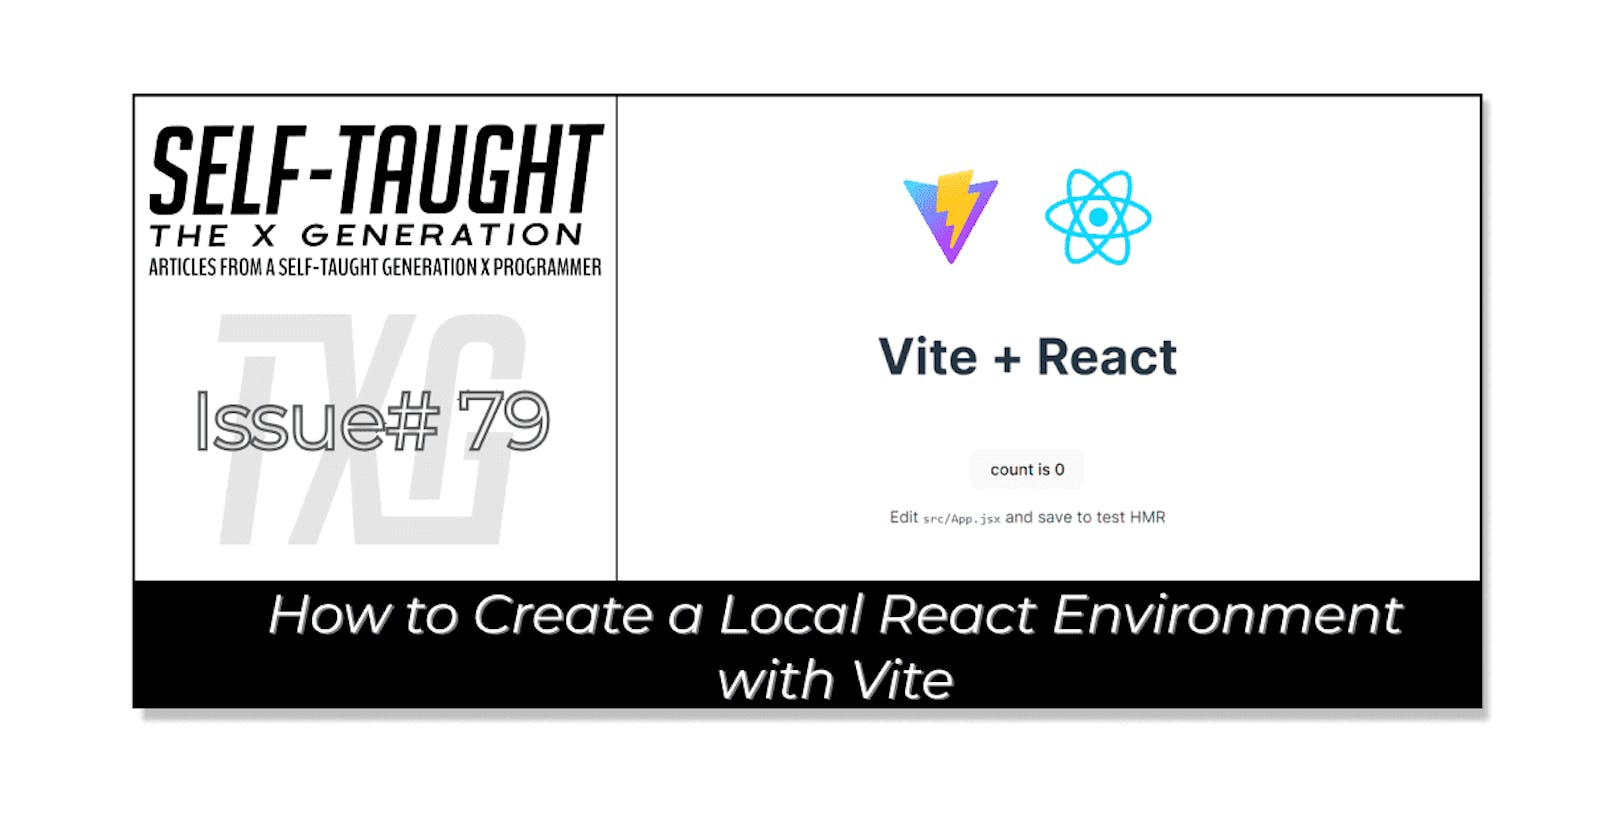 How to Create a Local React Environment with Vite